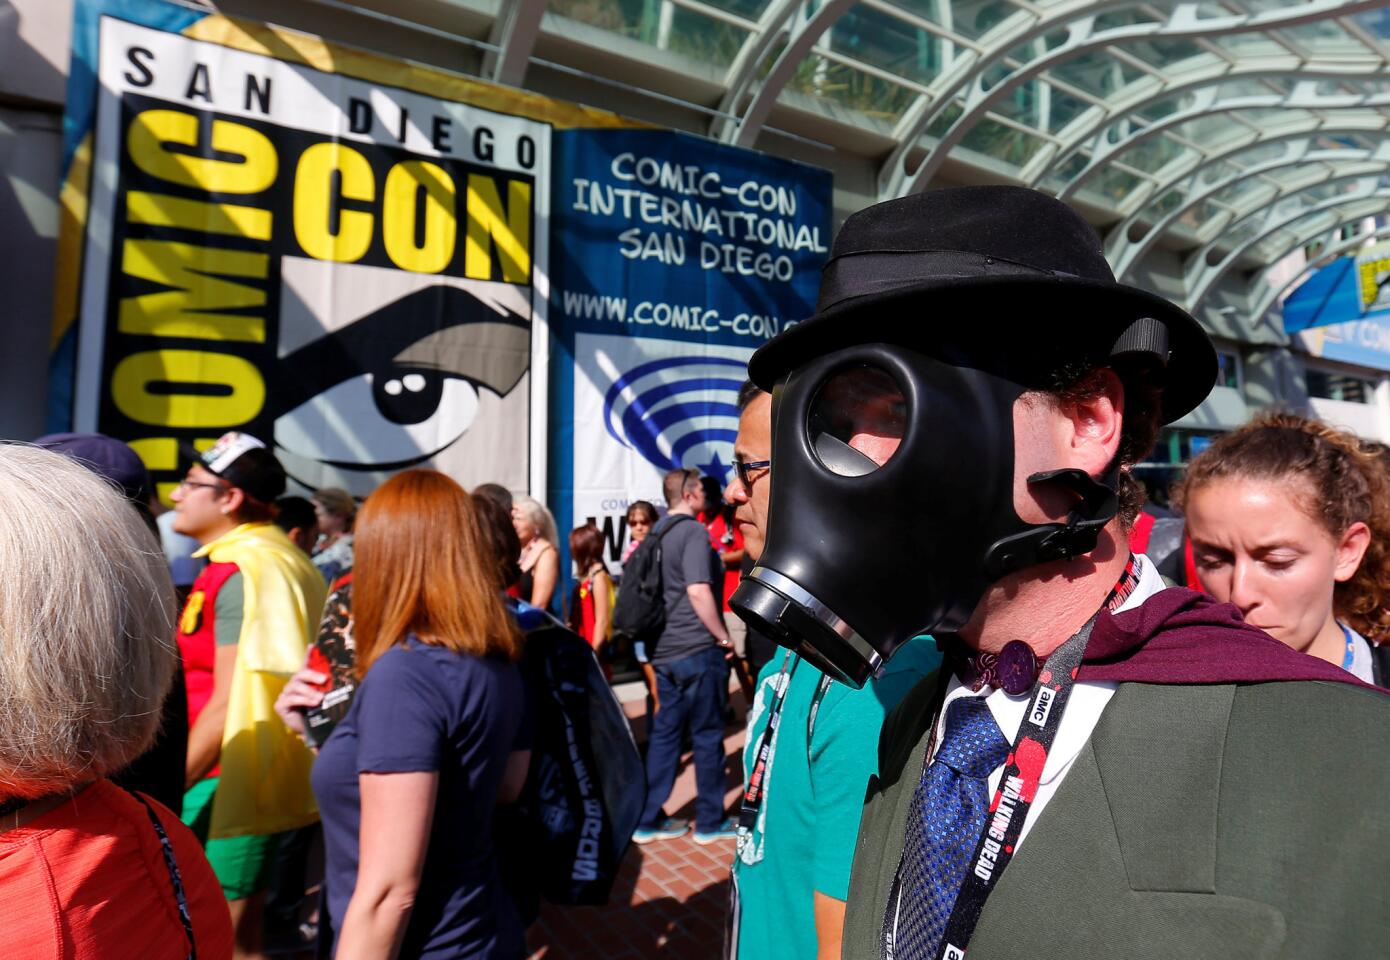 An attendee dressed as Sandman arrives for opening day of the annual Comic-Con International in San Diego, California